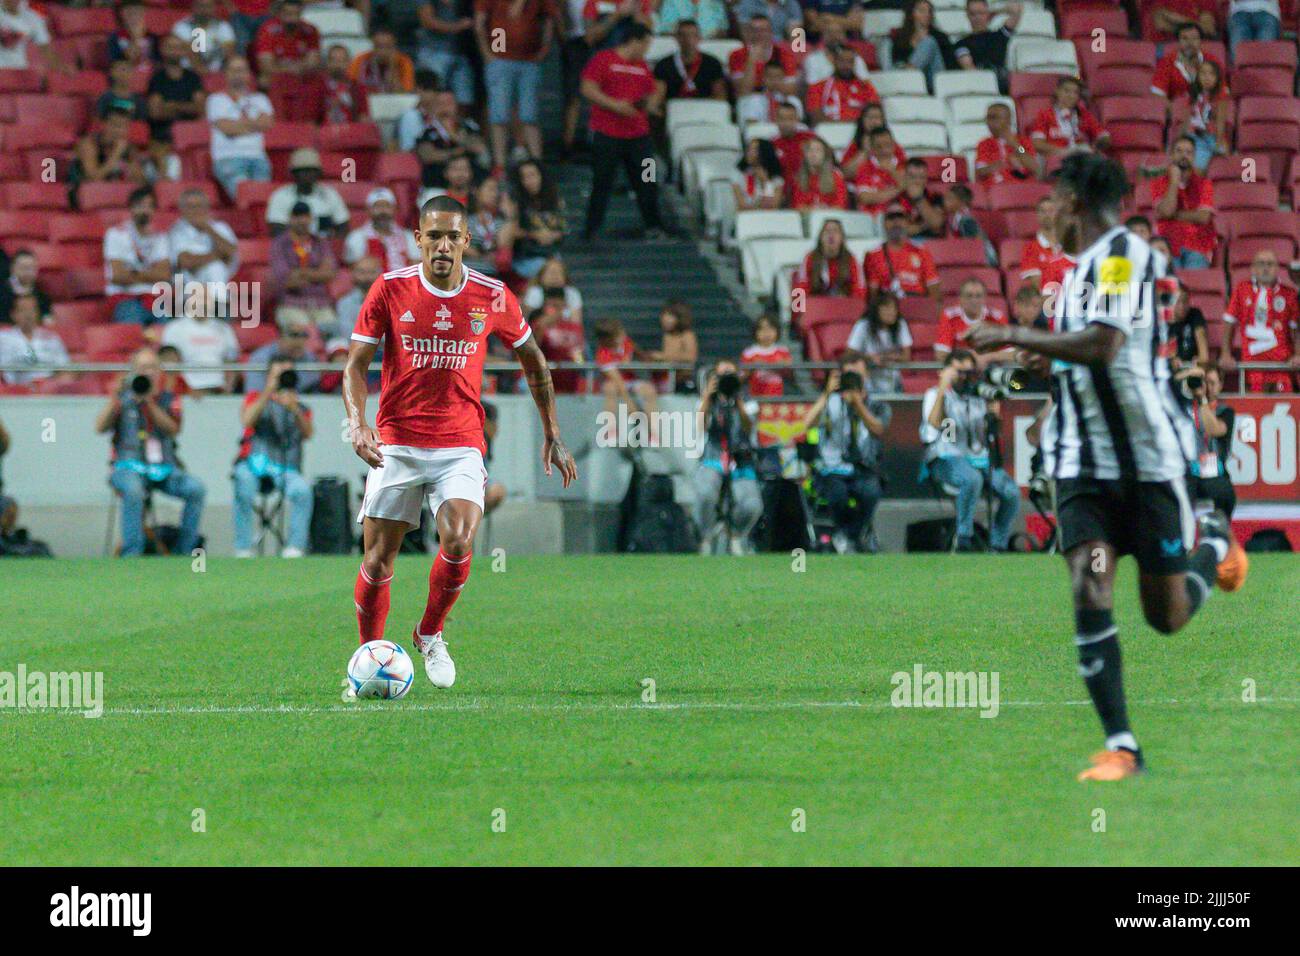 Lisbon, Portugal. July 26, 2022.  Benfica's defender from Brazil Gilberto (2) in action during the friendly game between SL Benfica vs Newcastle United FC Credit: Alexandre de Sousa/Alamy Live News Stock Photo